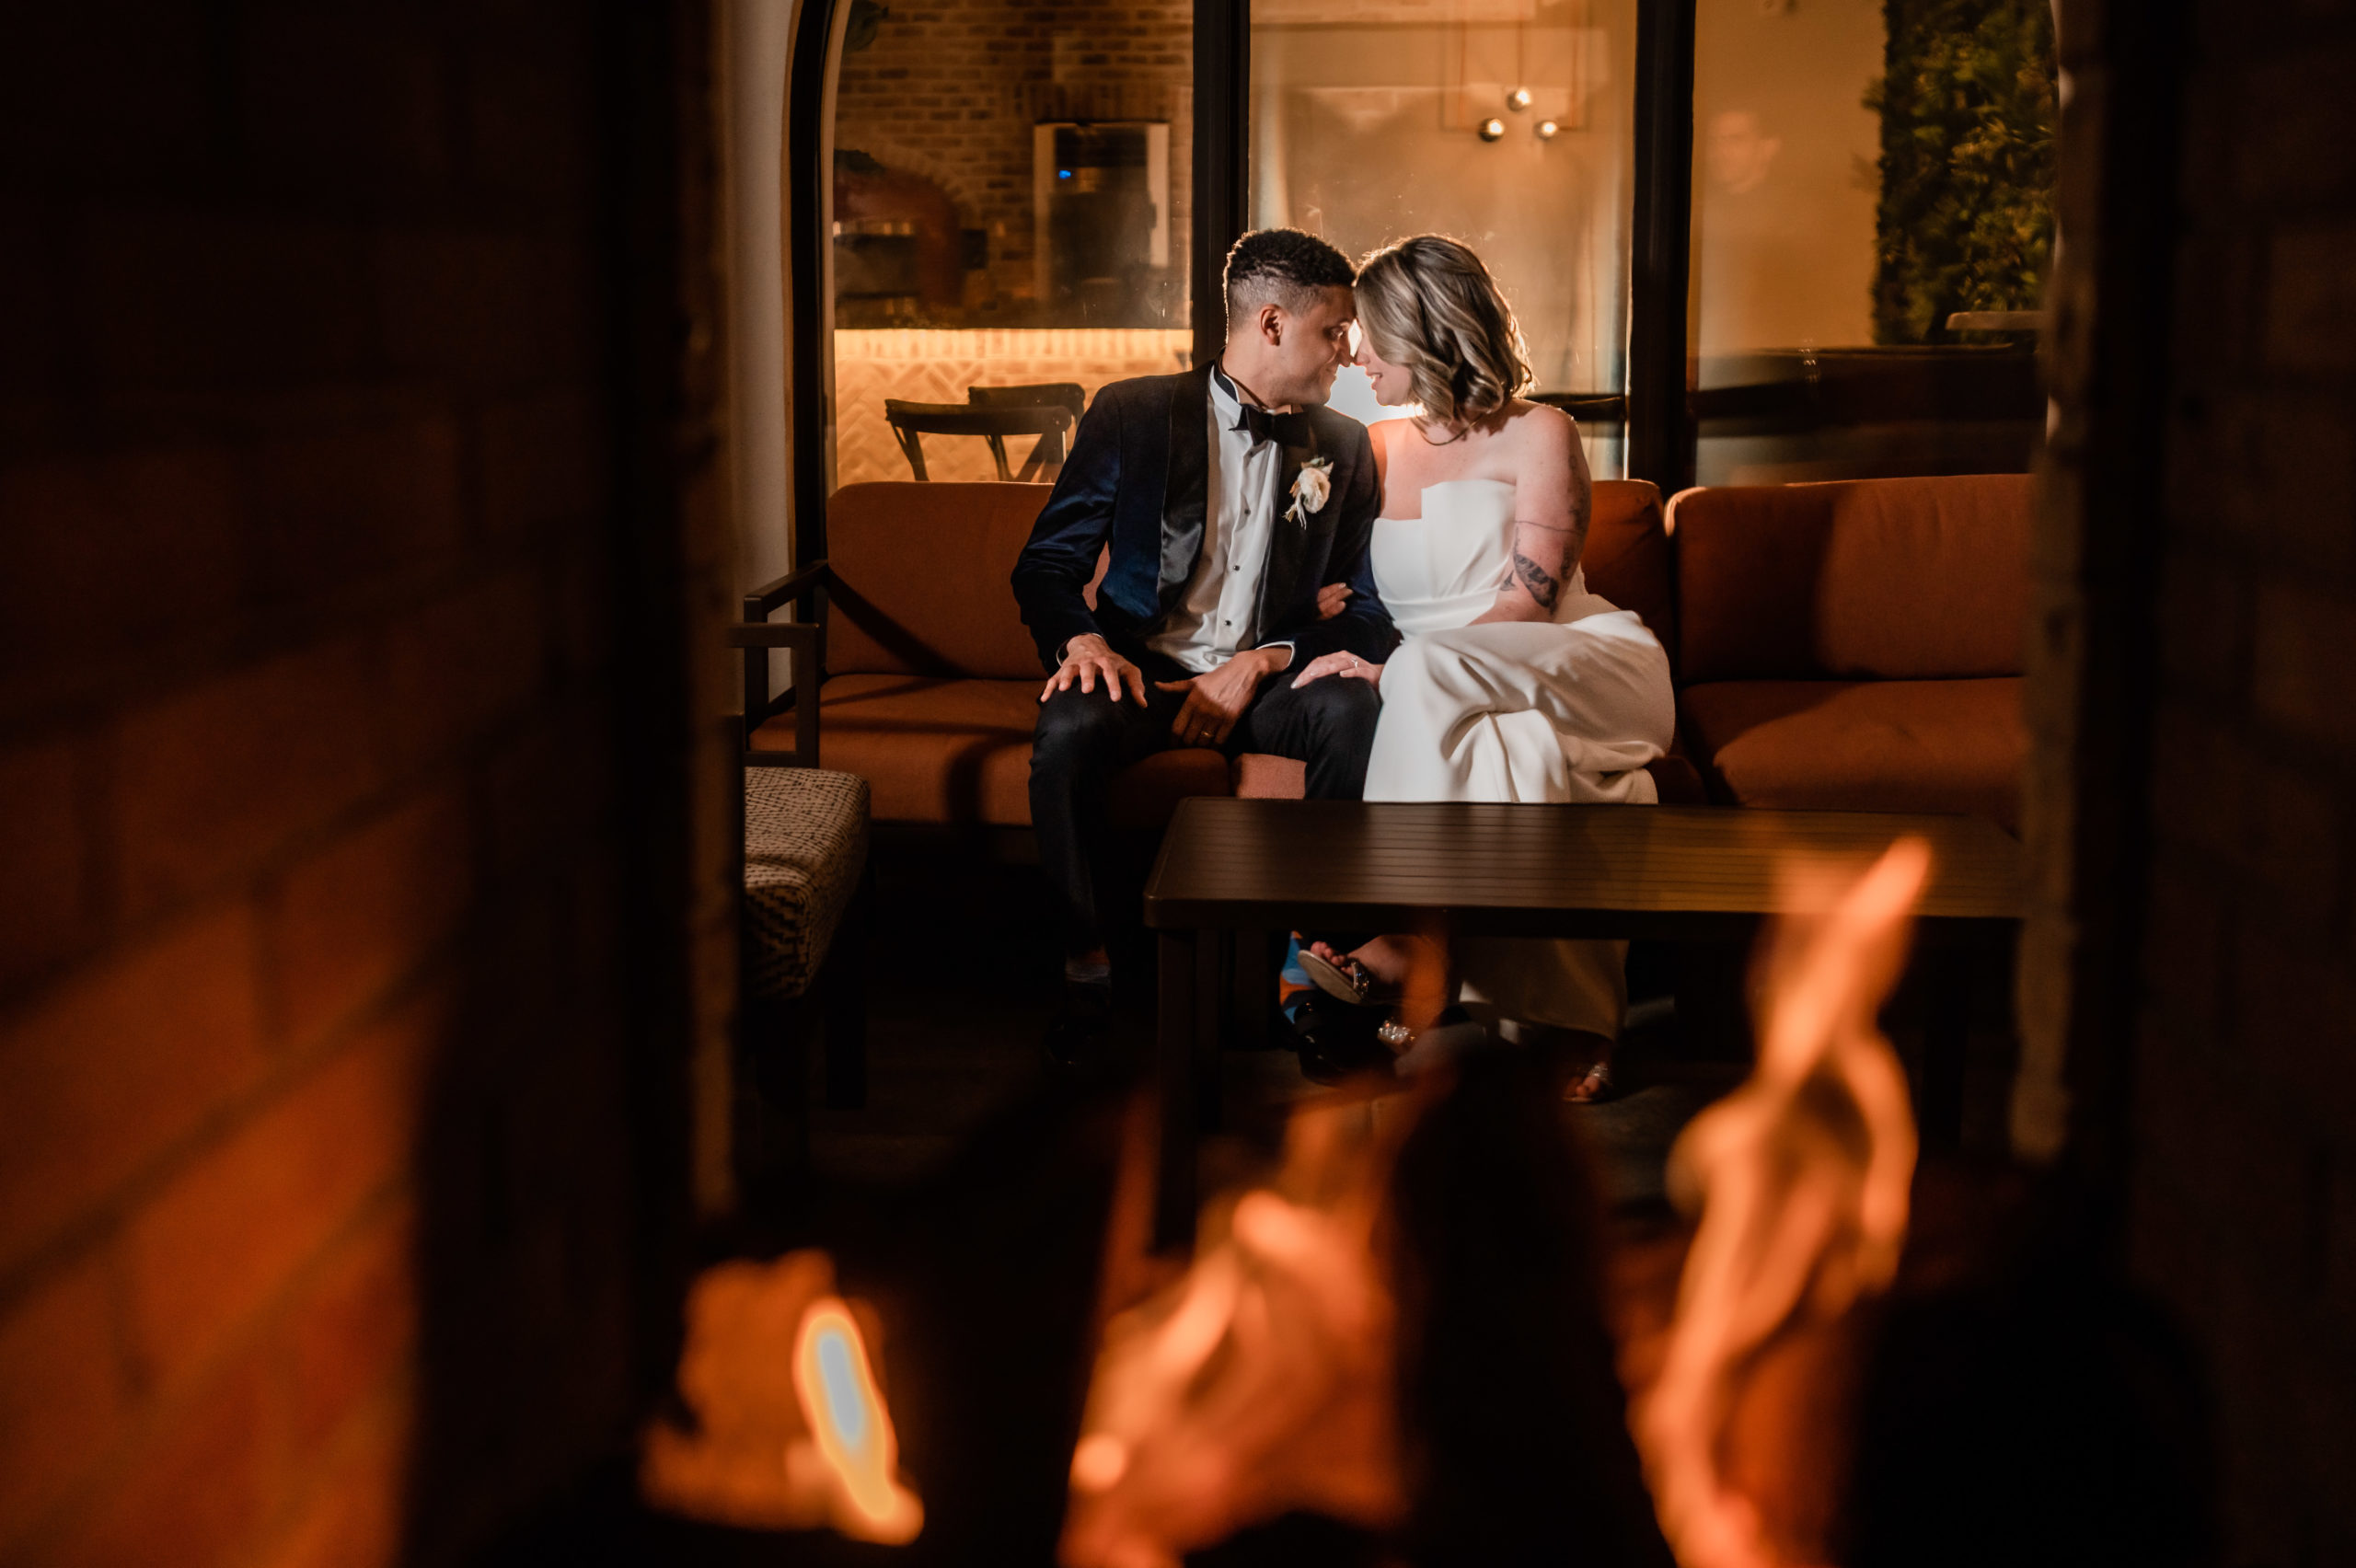 A photographic portrait of a couple sitting on an orange couch outside on a patio embracing and putting their heads together at night time by a fire place on the patio during their wedding in Andover New Jersey.